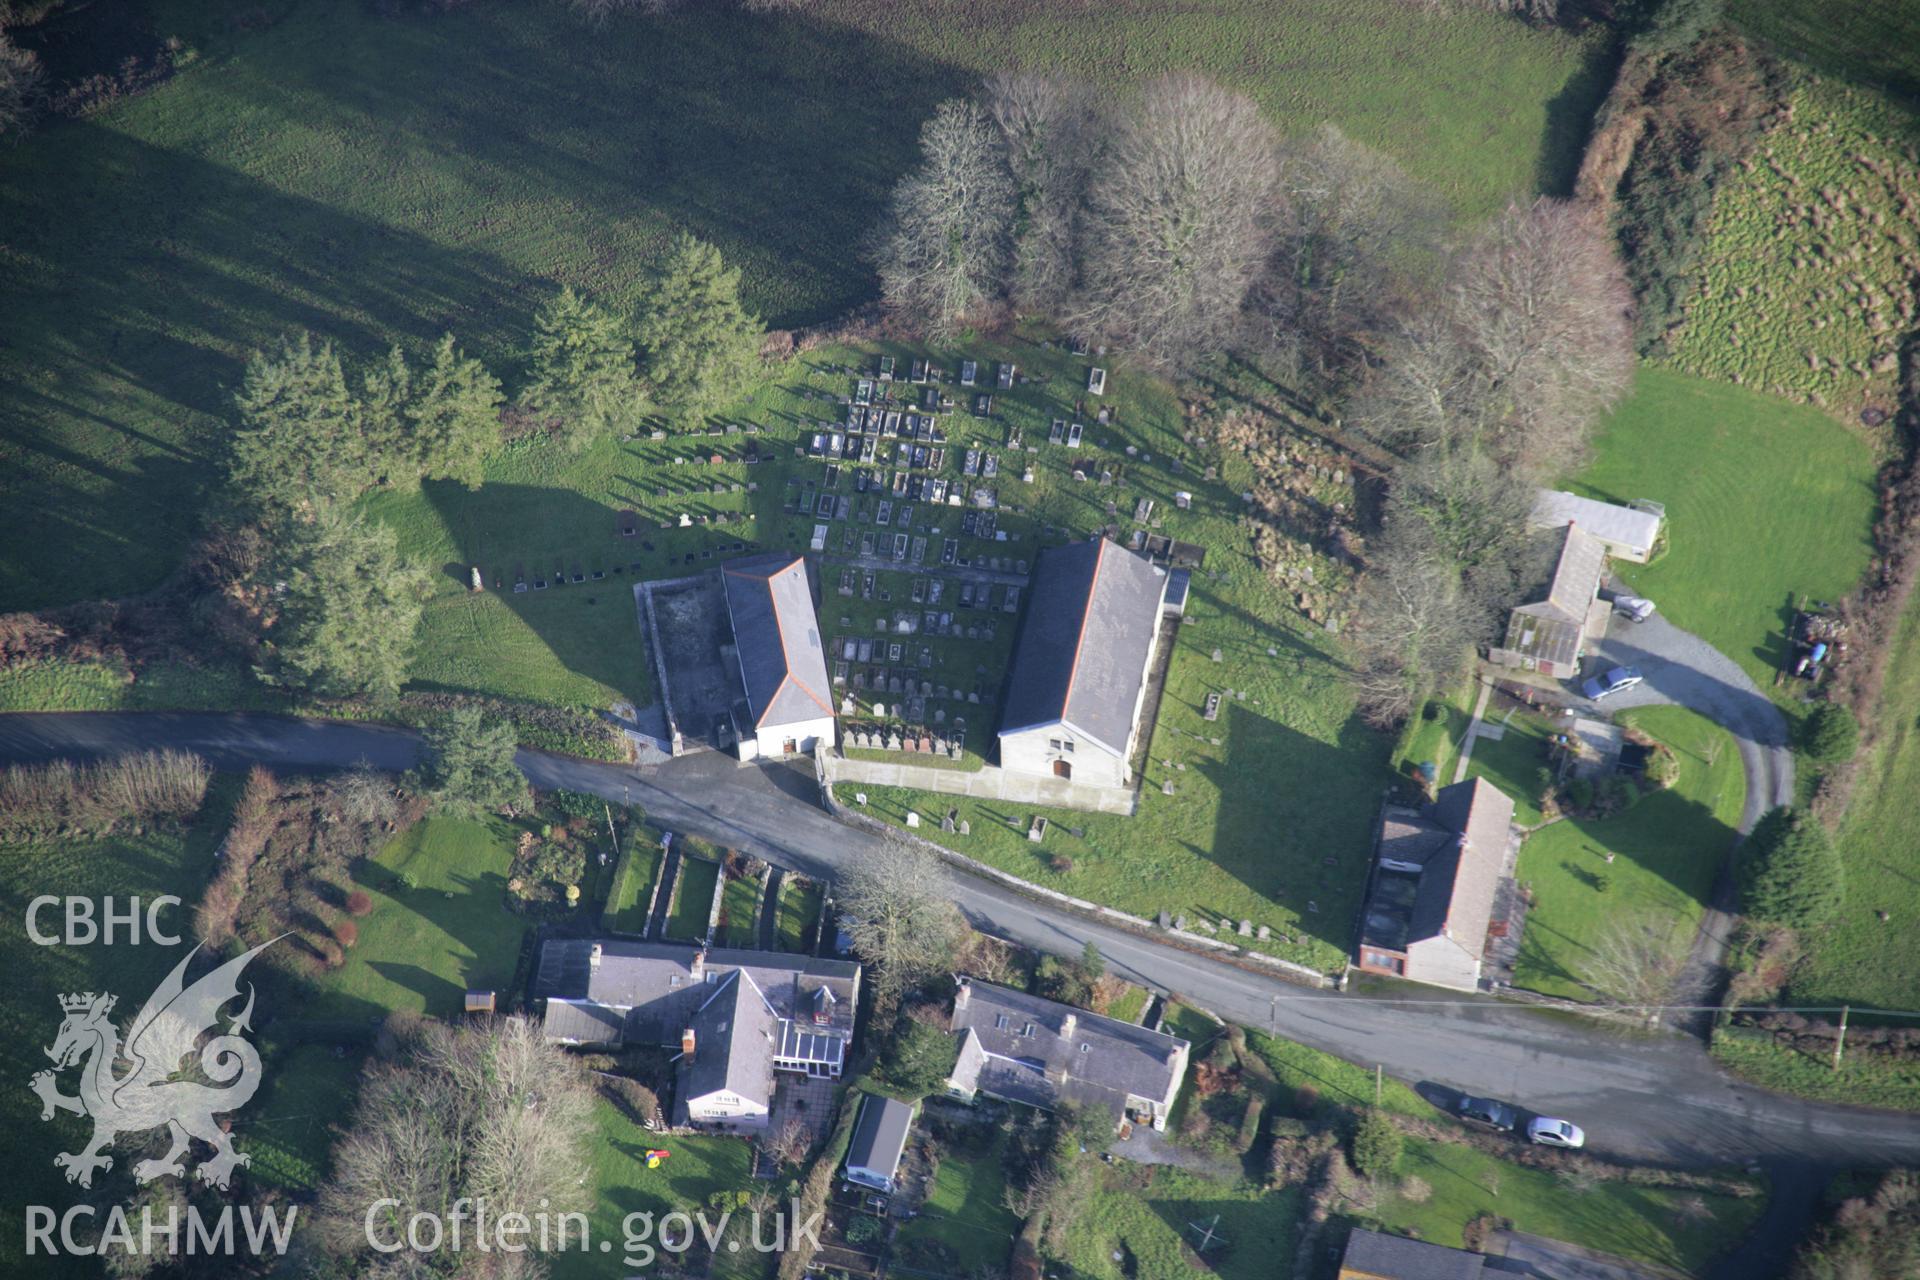 RCAHMW colour oblique aerial photograph of Pisgah English Baptist Chapel, Cresswell Quay, viewed from the west. Taken on 11 January 2006 by Toby Driver.